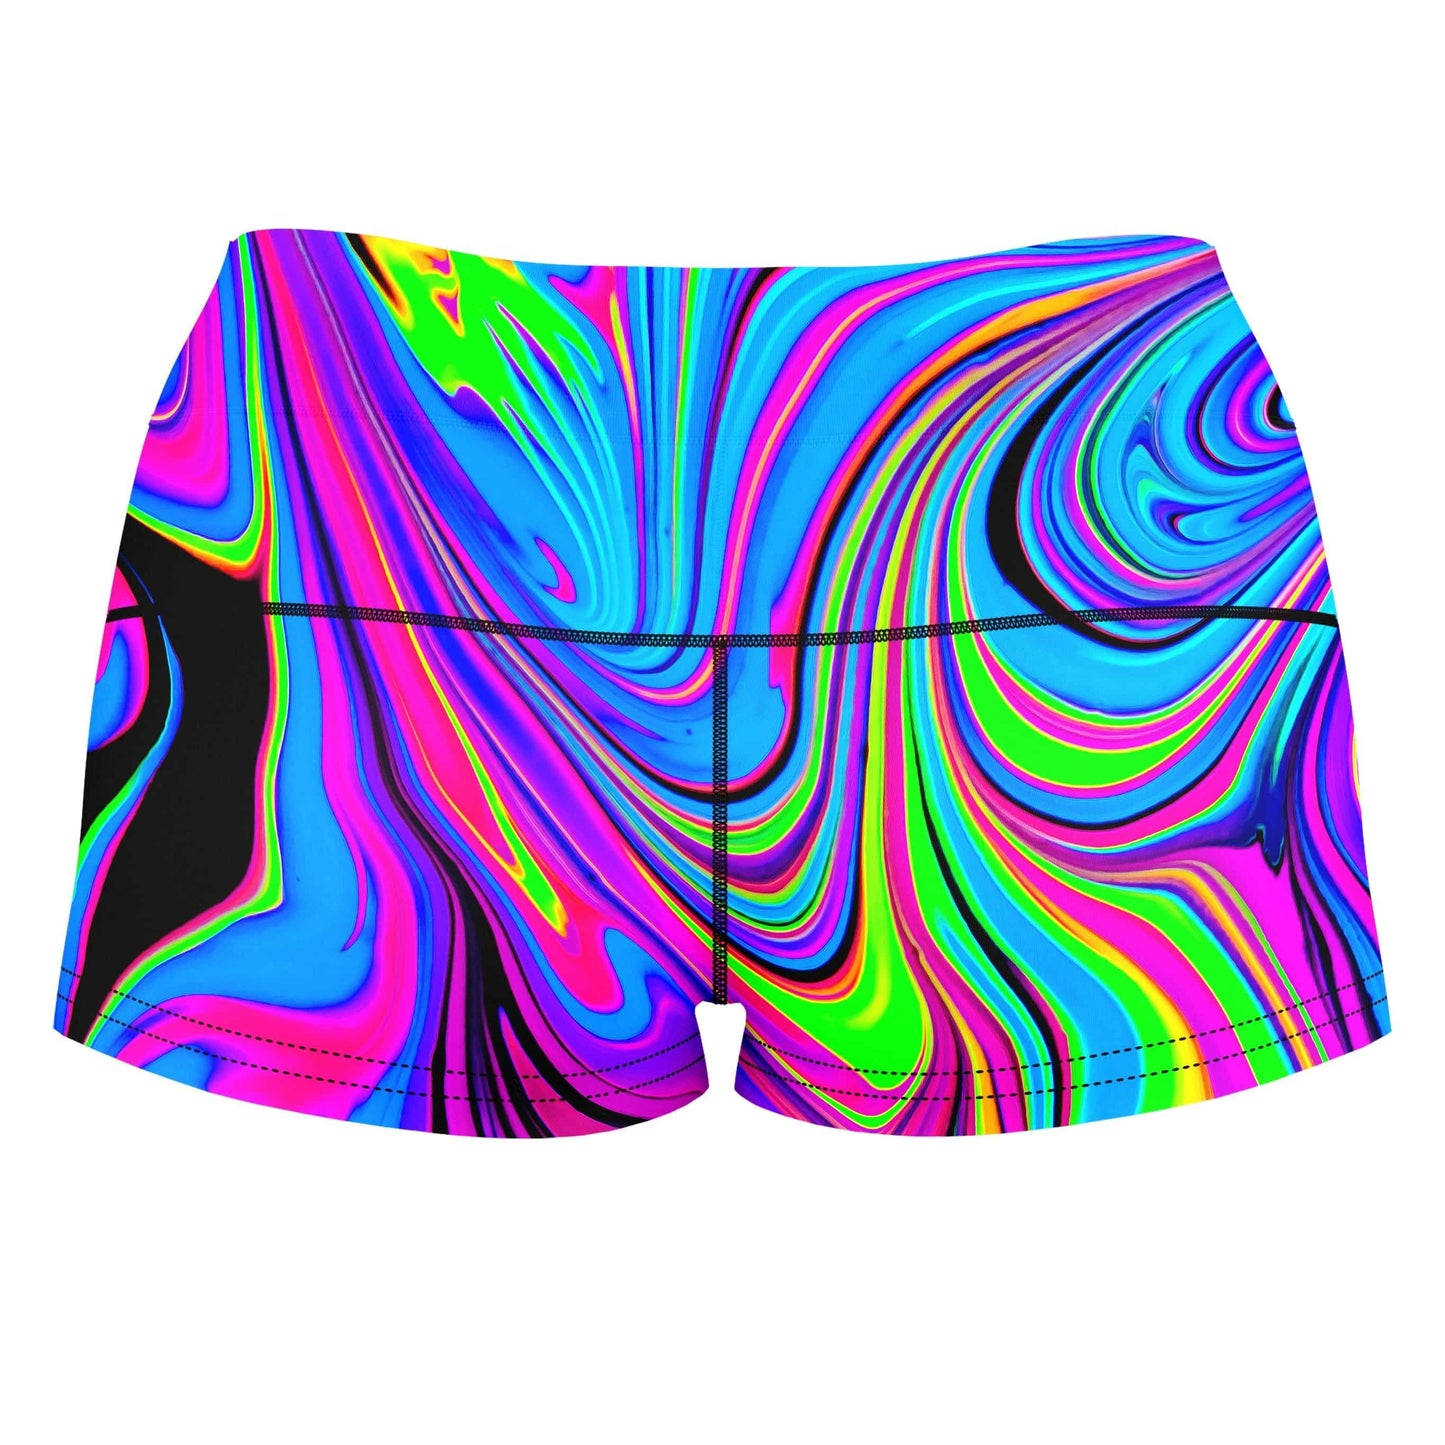 Cosmic Flow High-Waisted Women's Shorts, Psychedelic Pourhouse, | iEDM